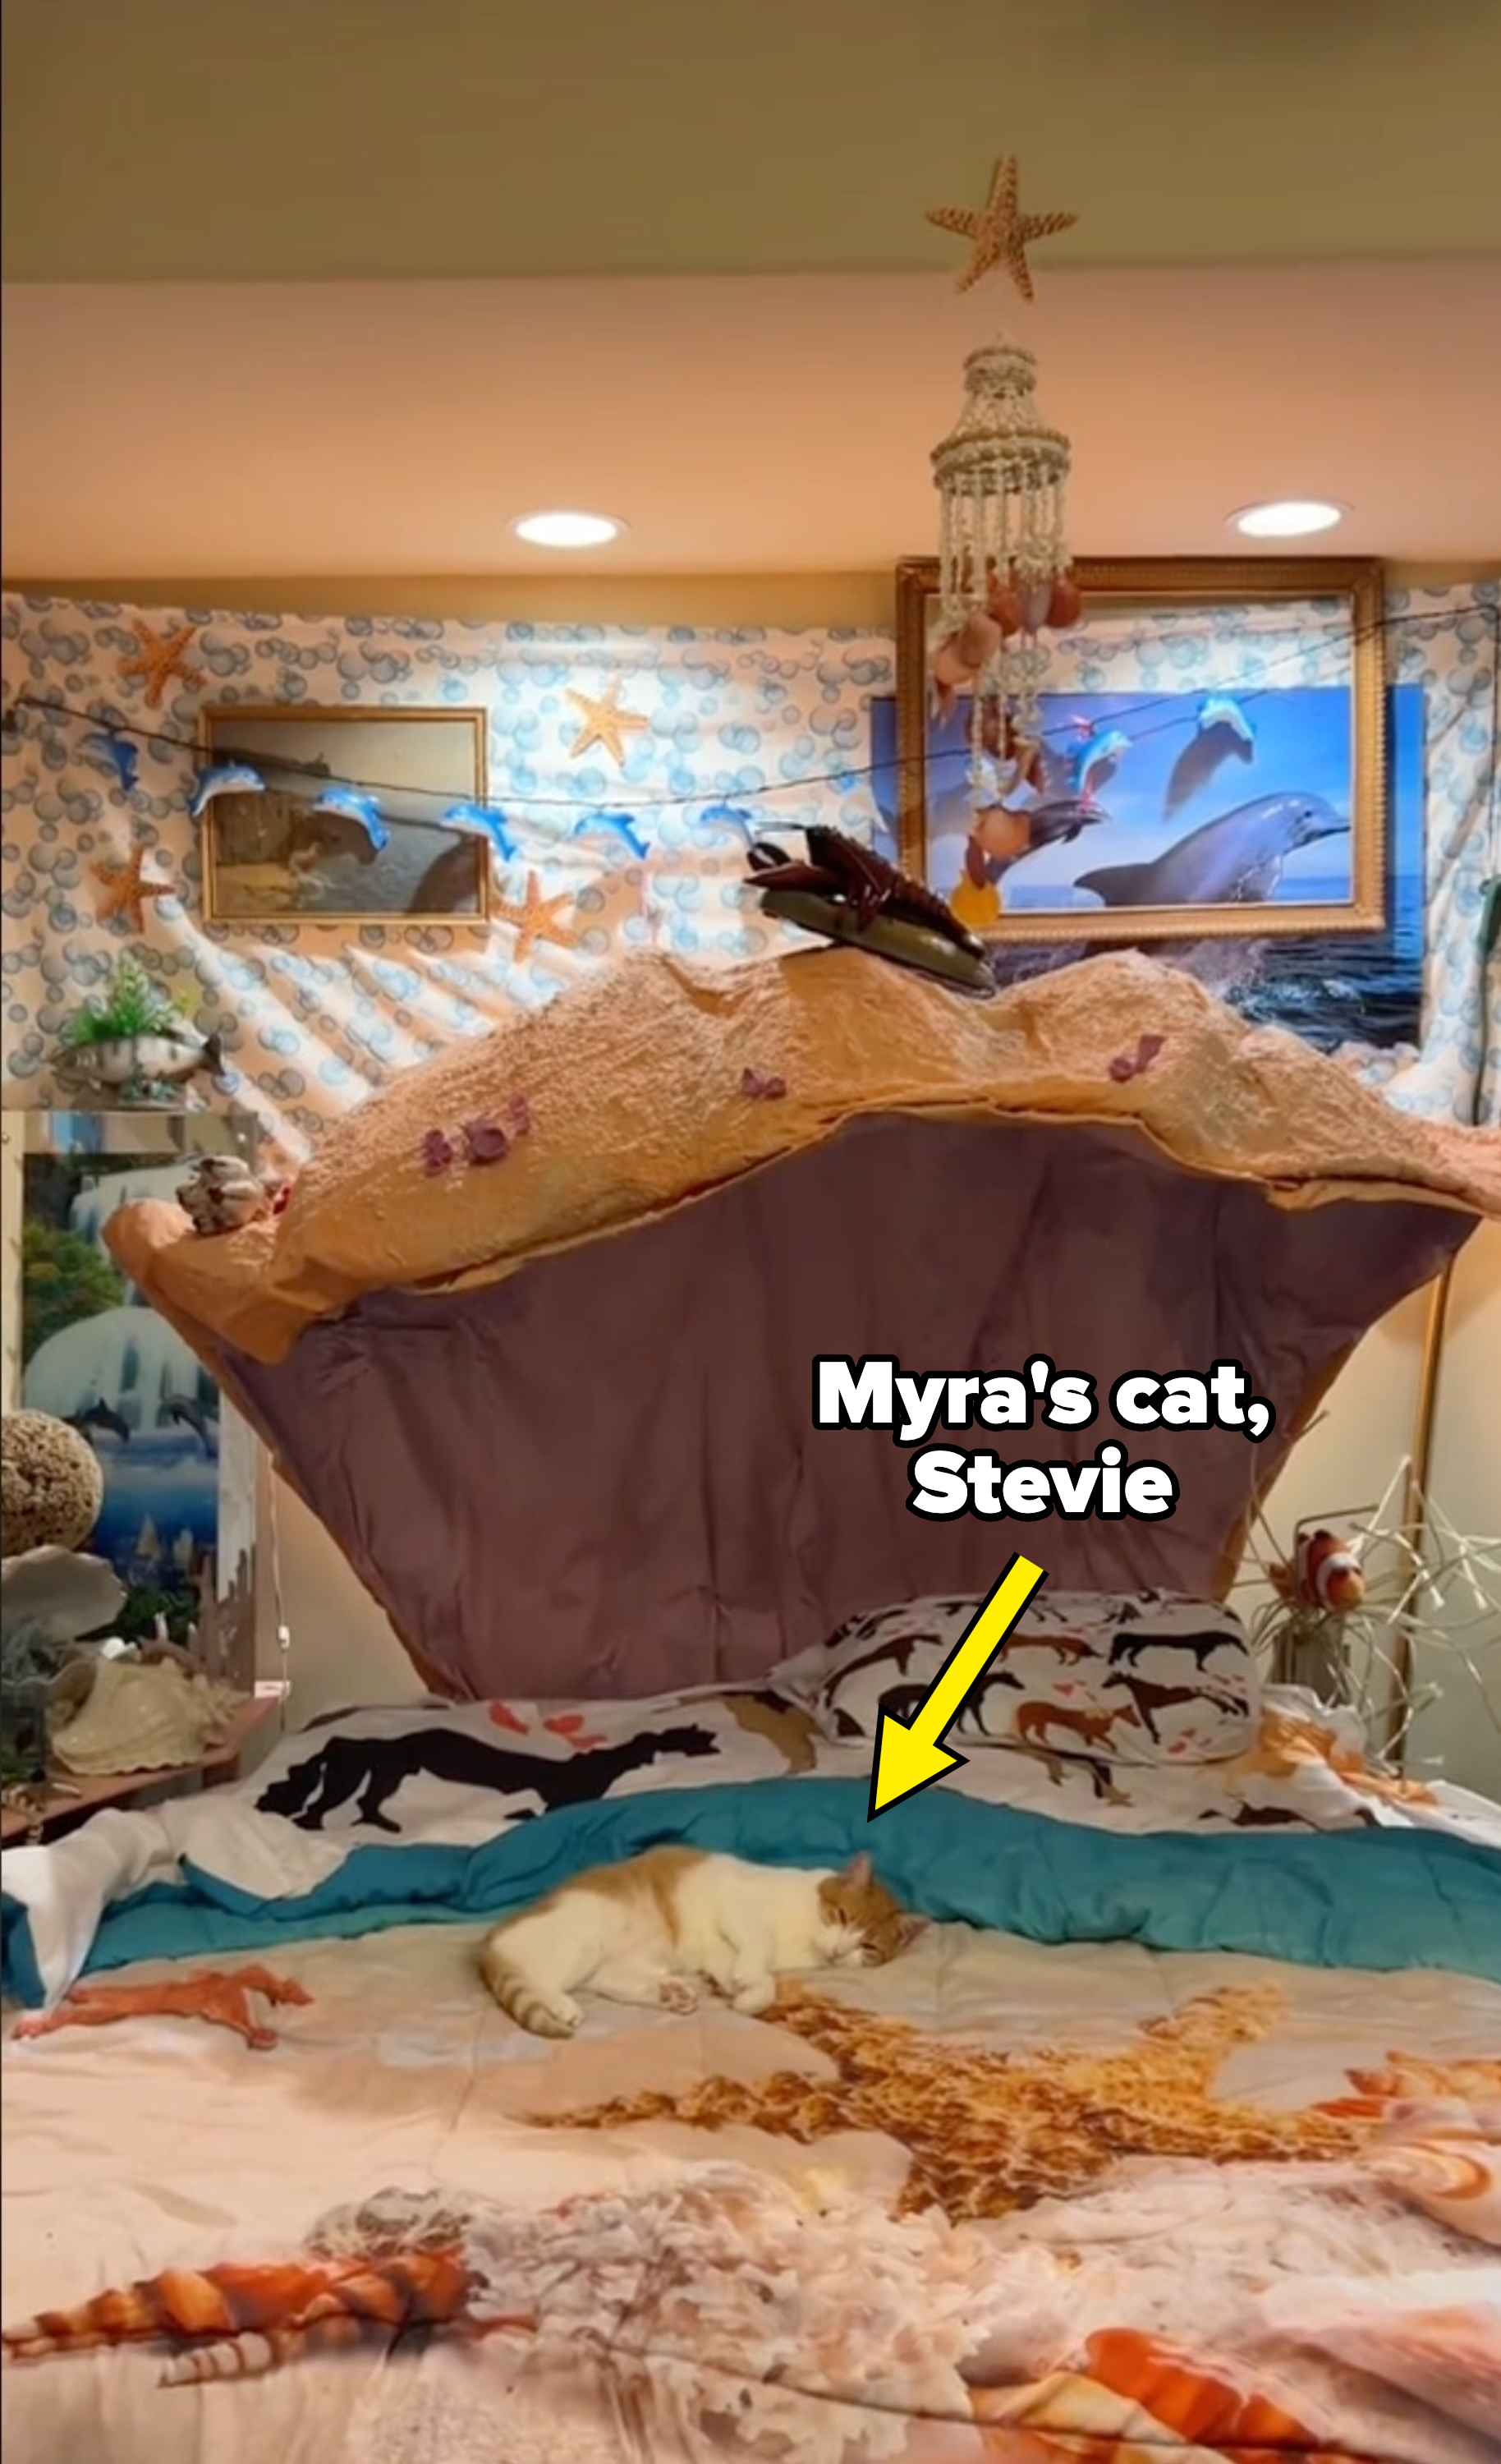 Myra&#x27;s is showing her ocean-themed bedroom, which also has her cat, Stevie, lying on the seashell bed